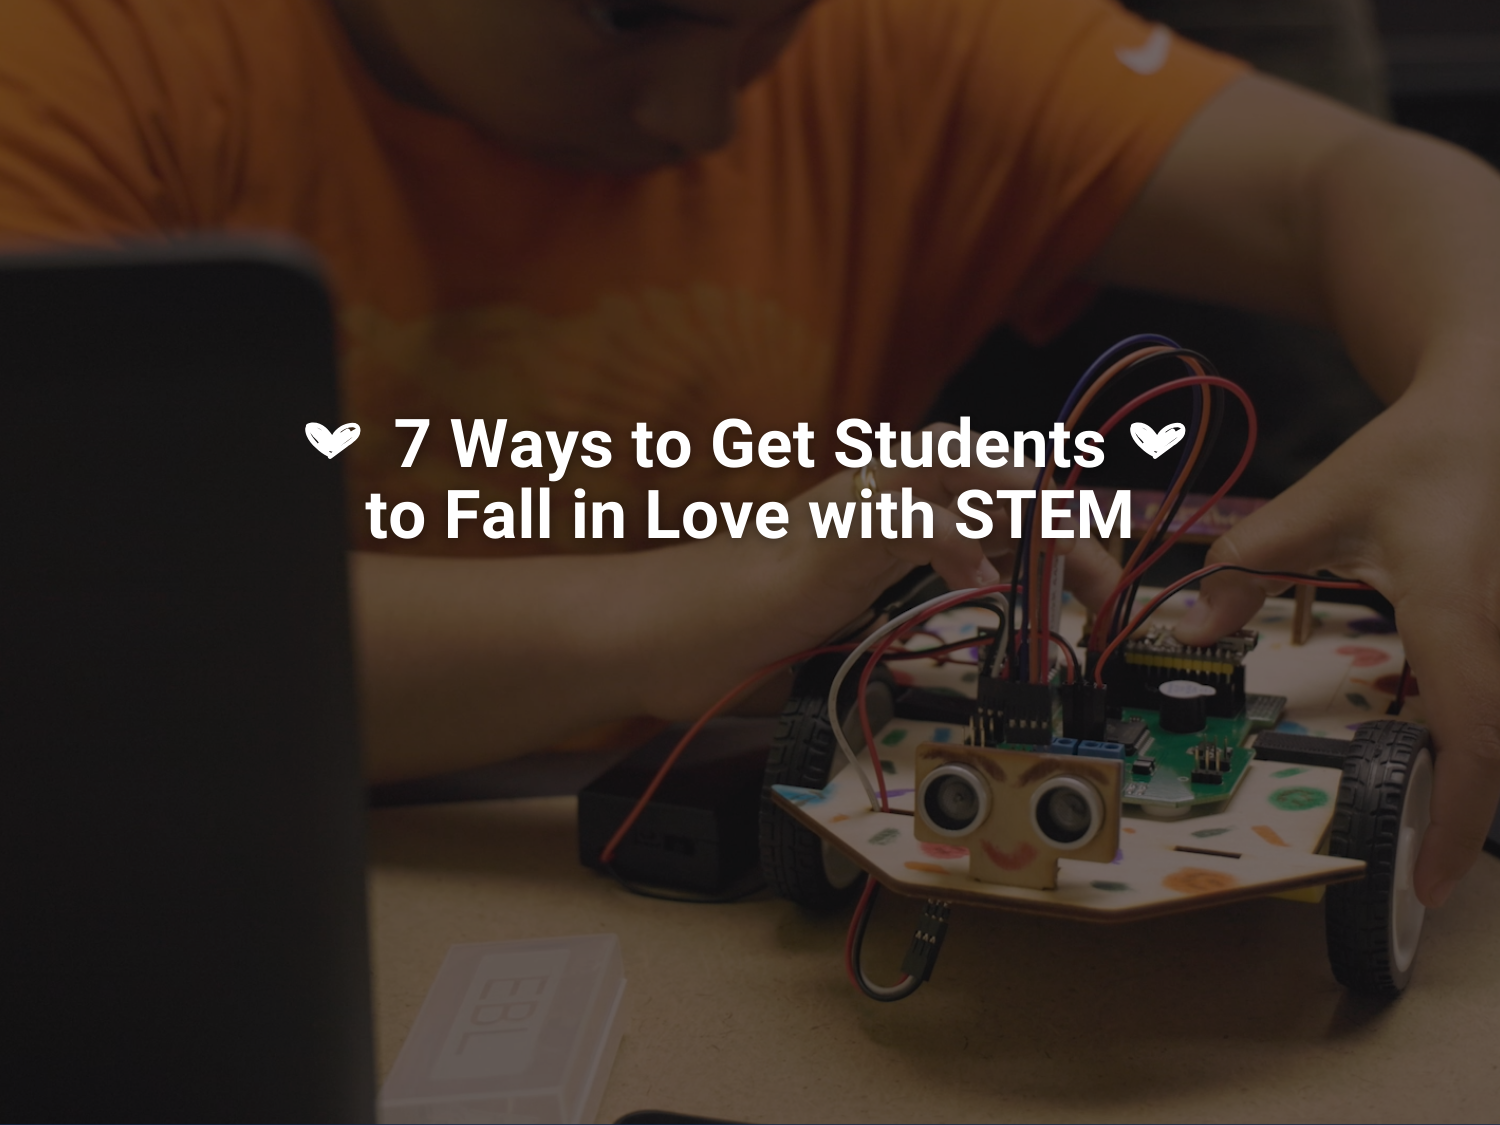 7 Ways to get students to fall in love with STEM